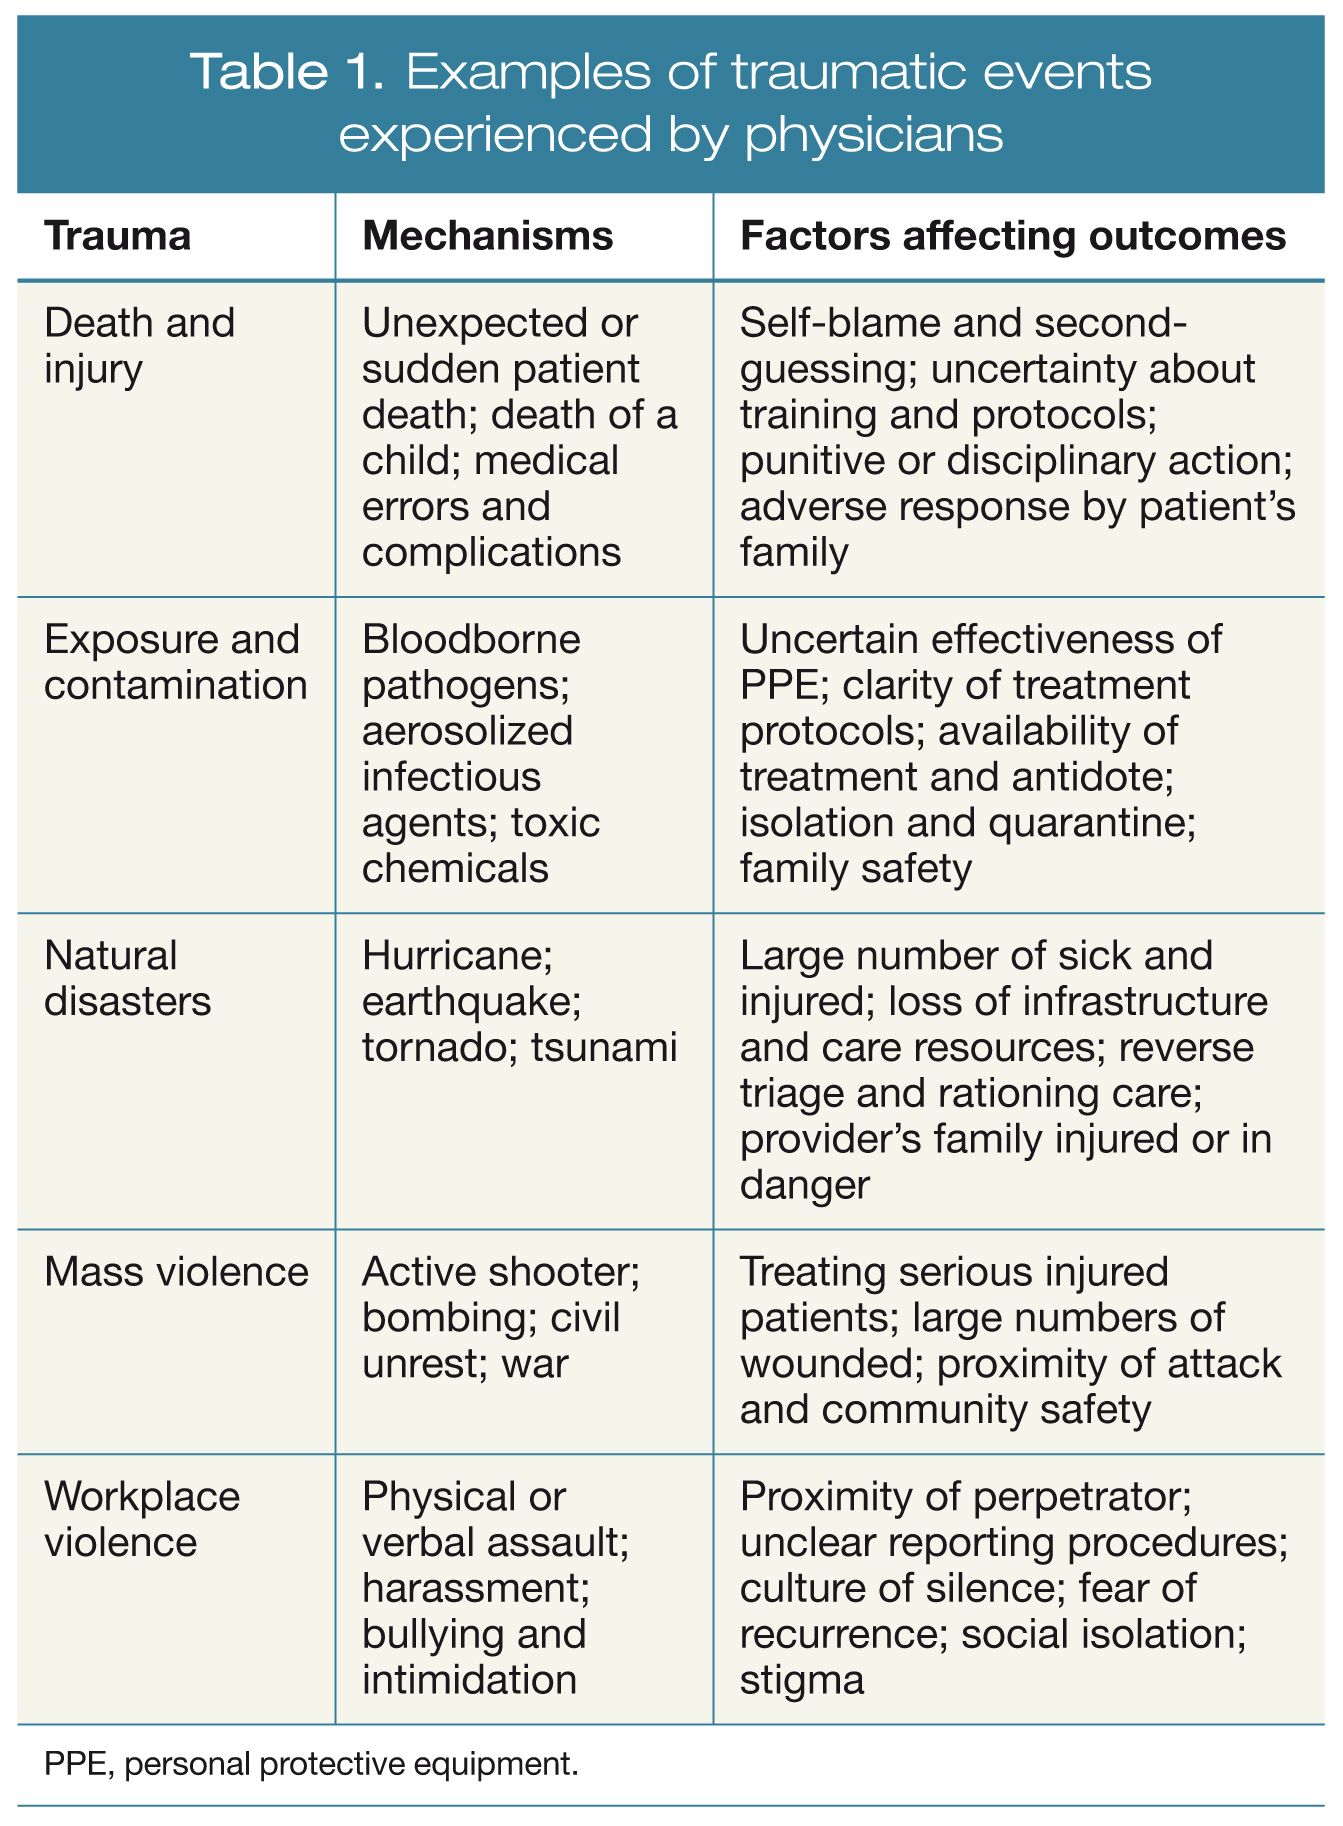 Examples of traumatic events experienced by physicians